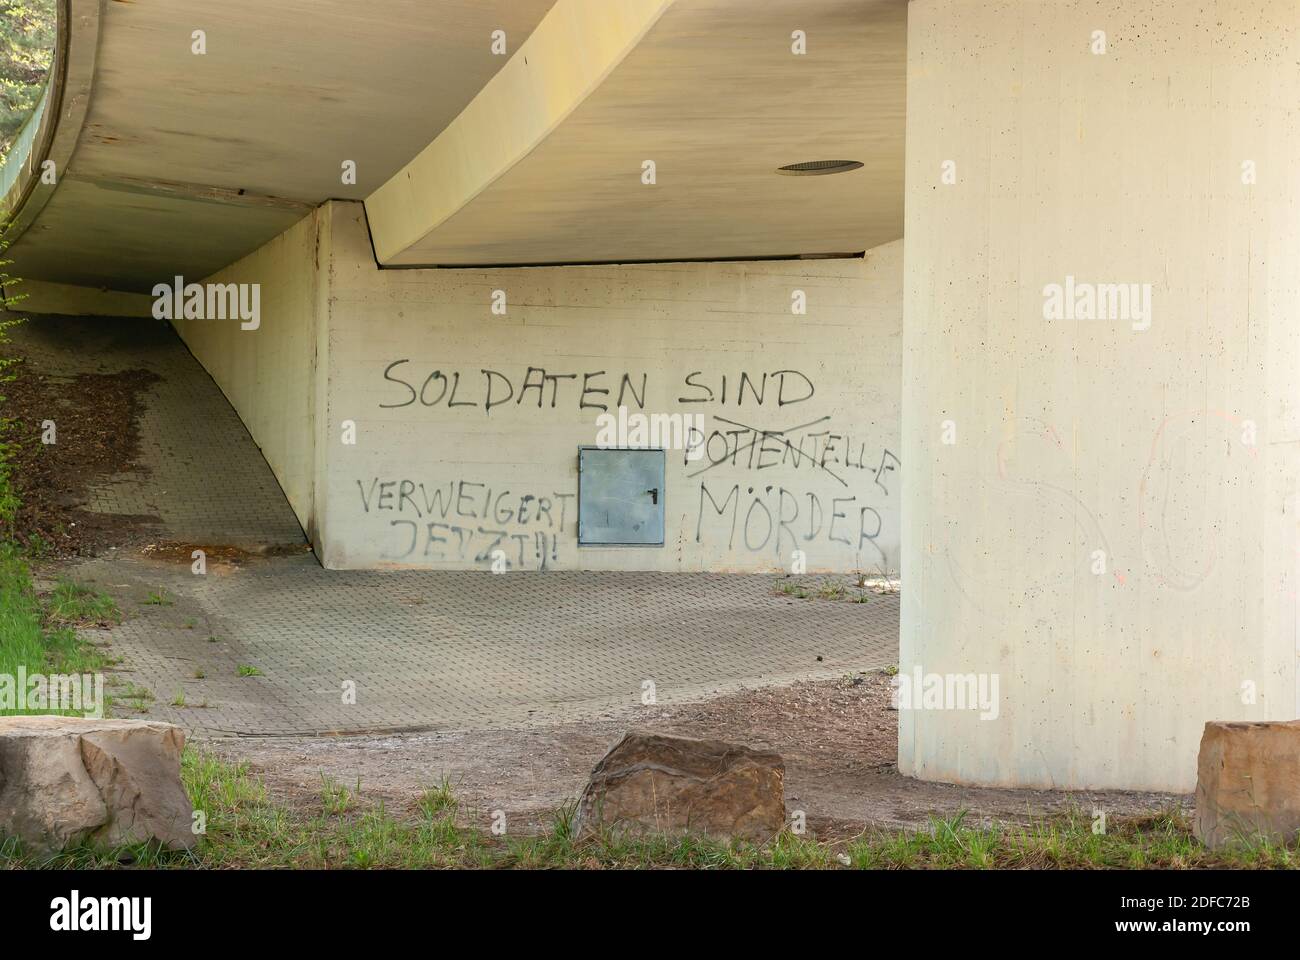 Bridge with graffito on soldiers in German language at a bridge pier. Stock Photo